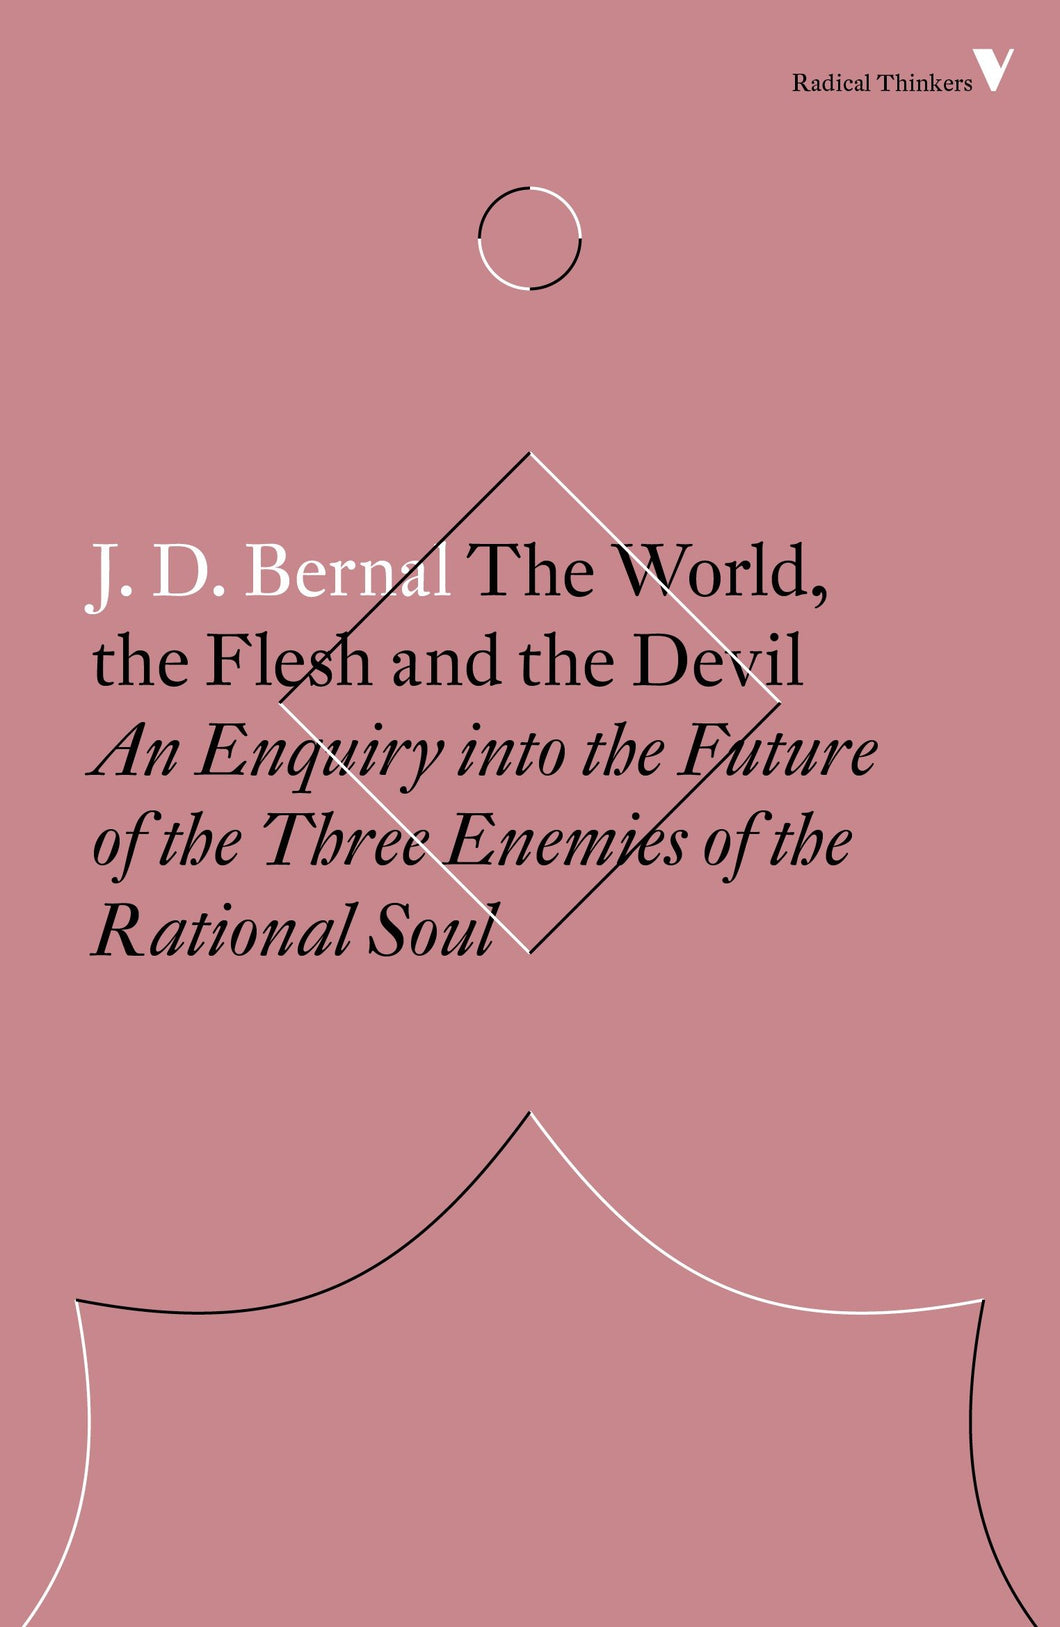 The World, the Flesh and the Devil: An Enquiry into the Future of the Three Enemies of the Rational Soul